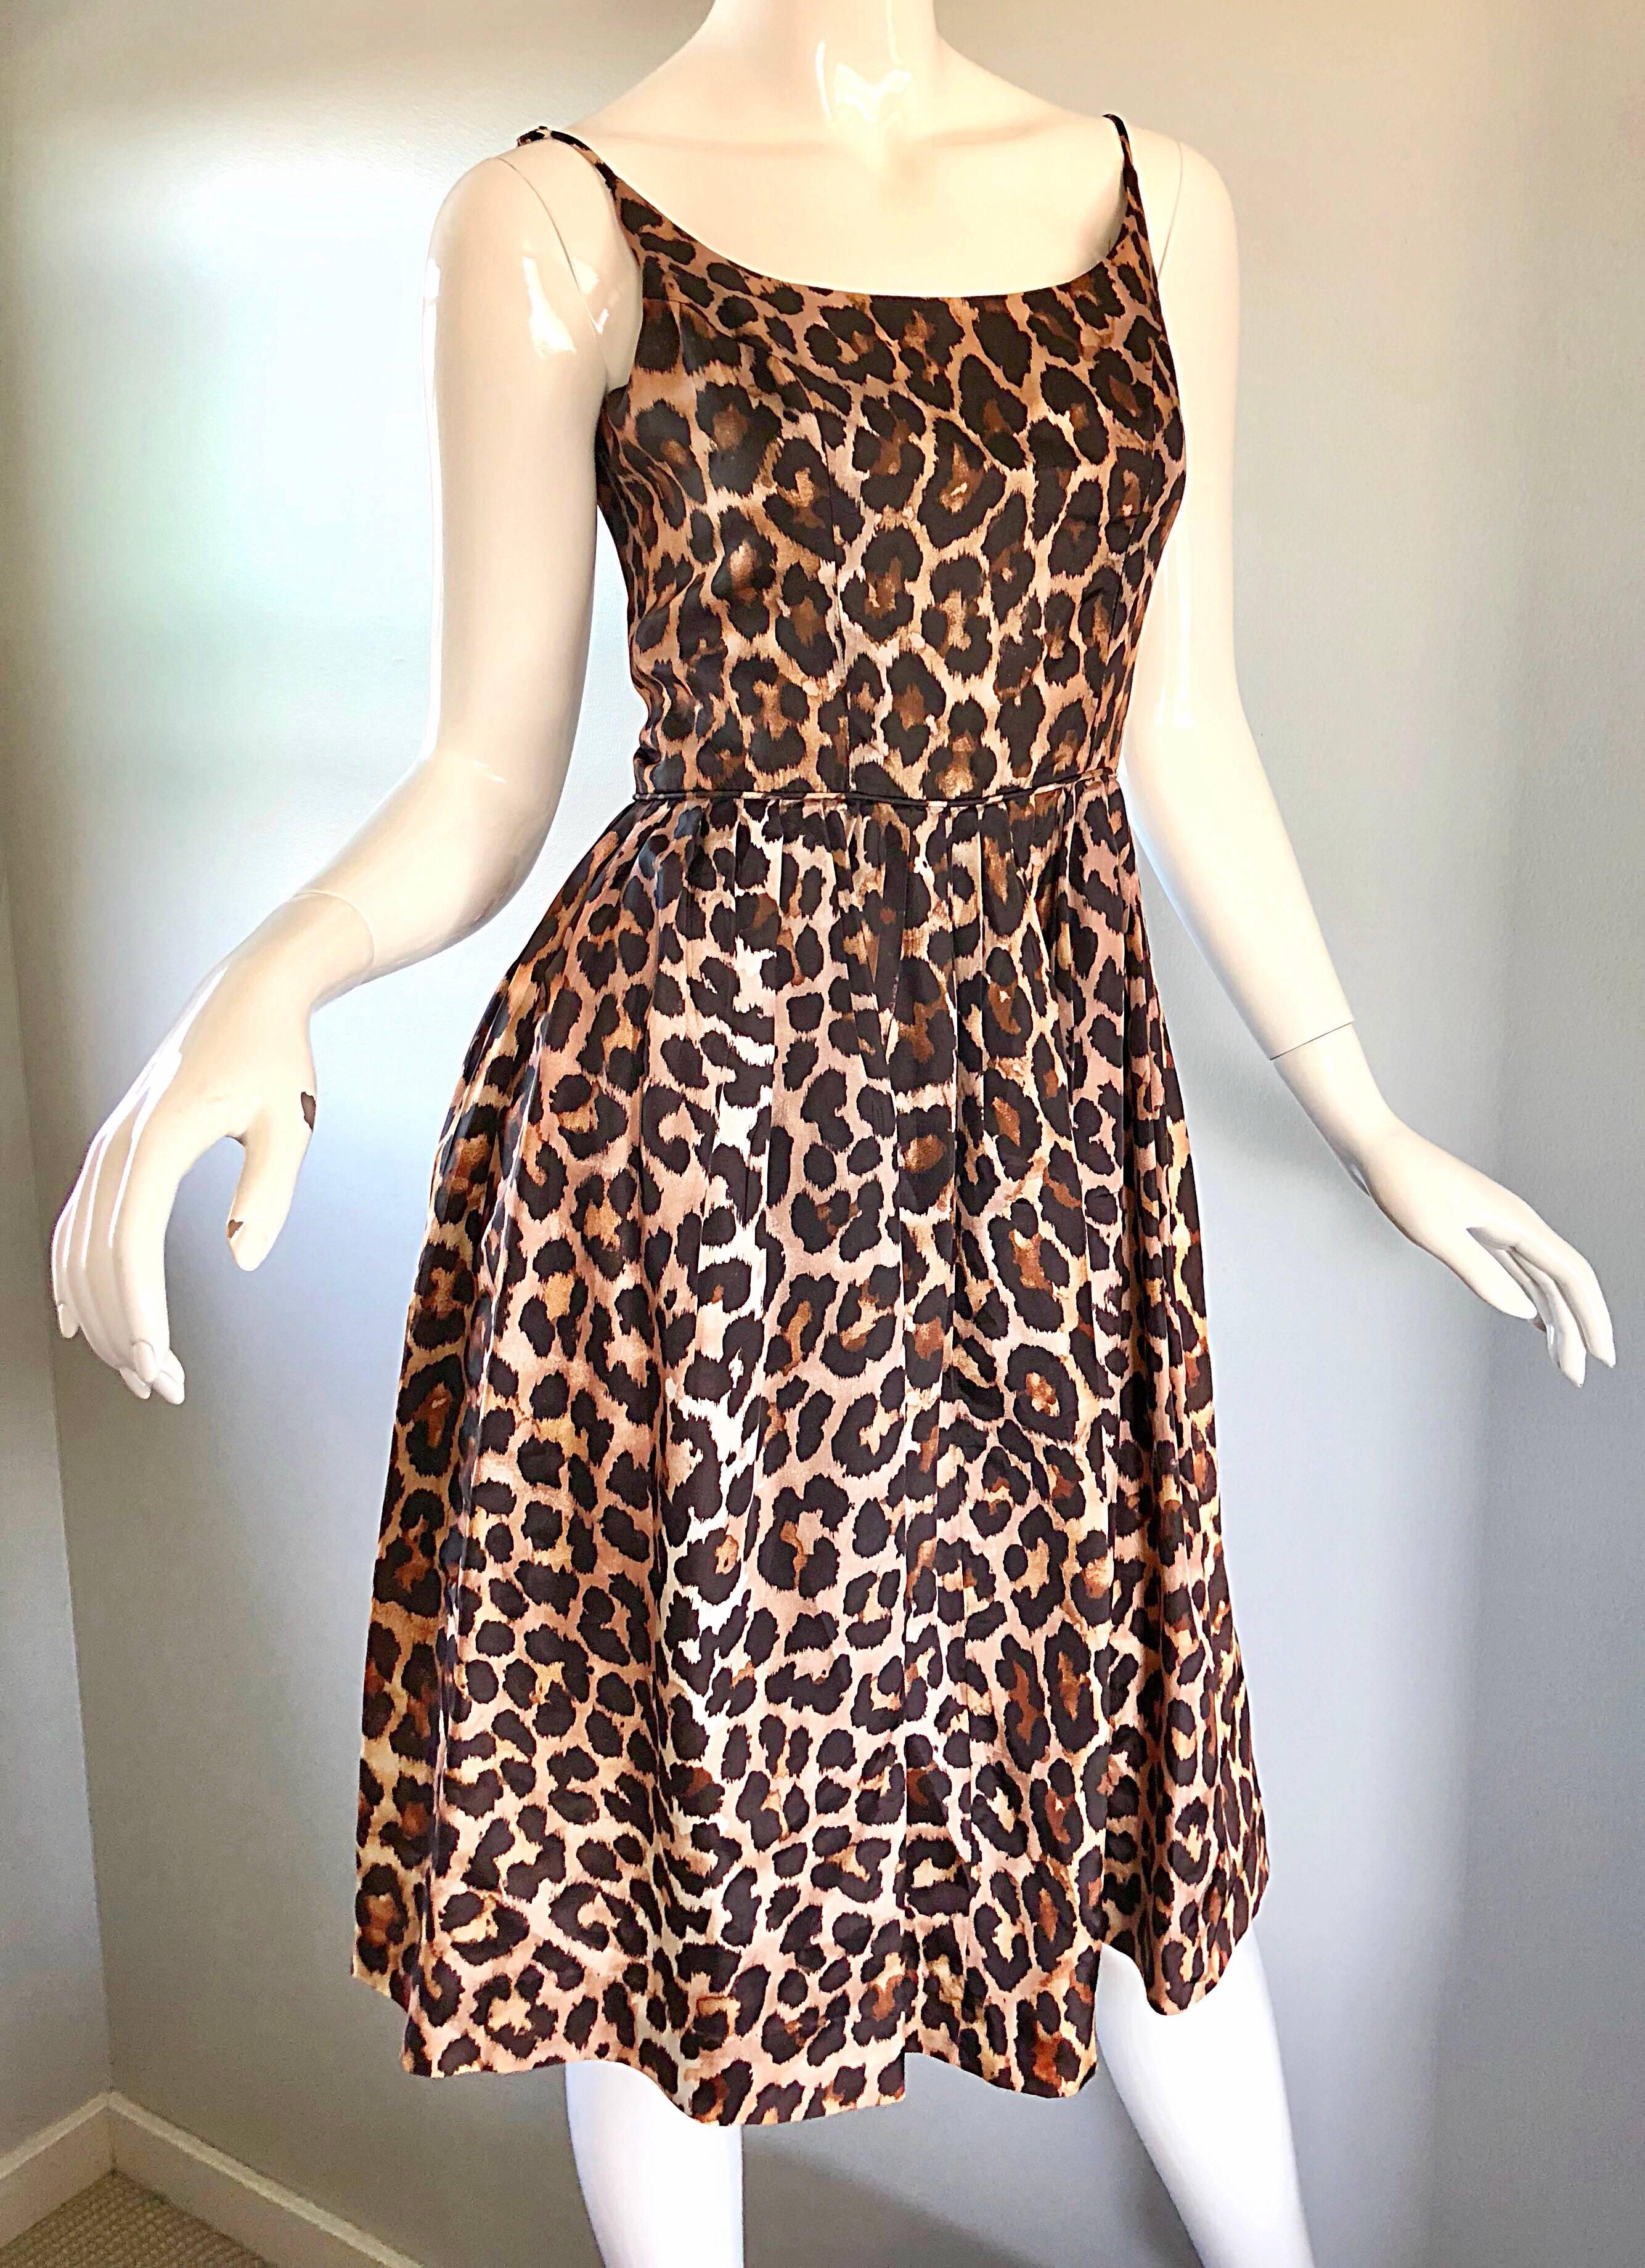 Women's Gorgeous 1950s Demi Couture Leopard Cheetah Print Silk Fit n' Flare 50s Dress For Sale